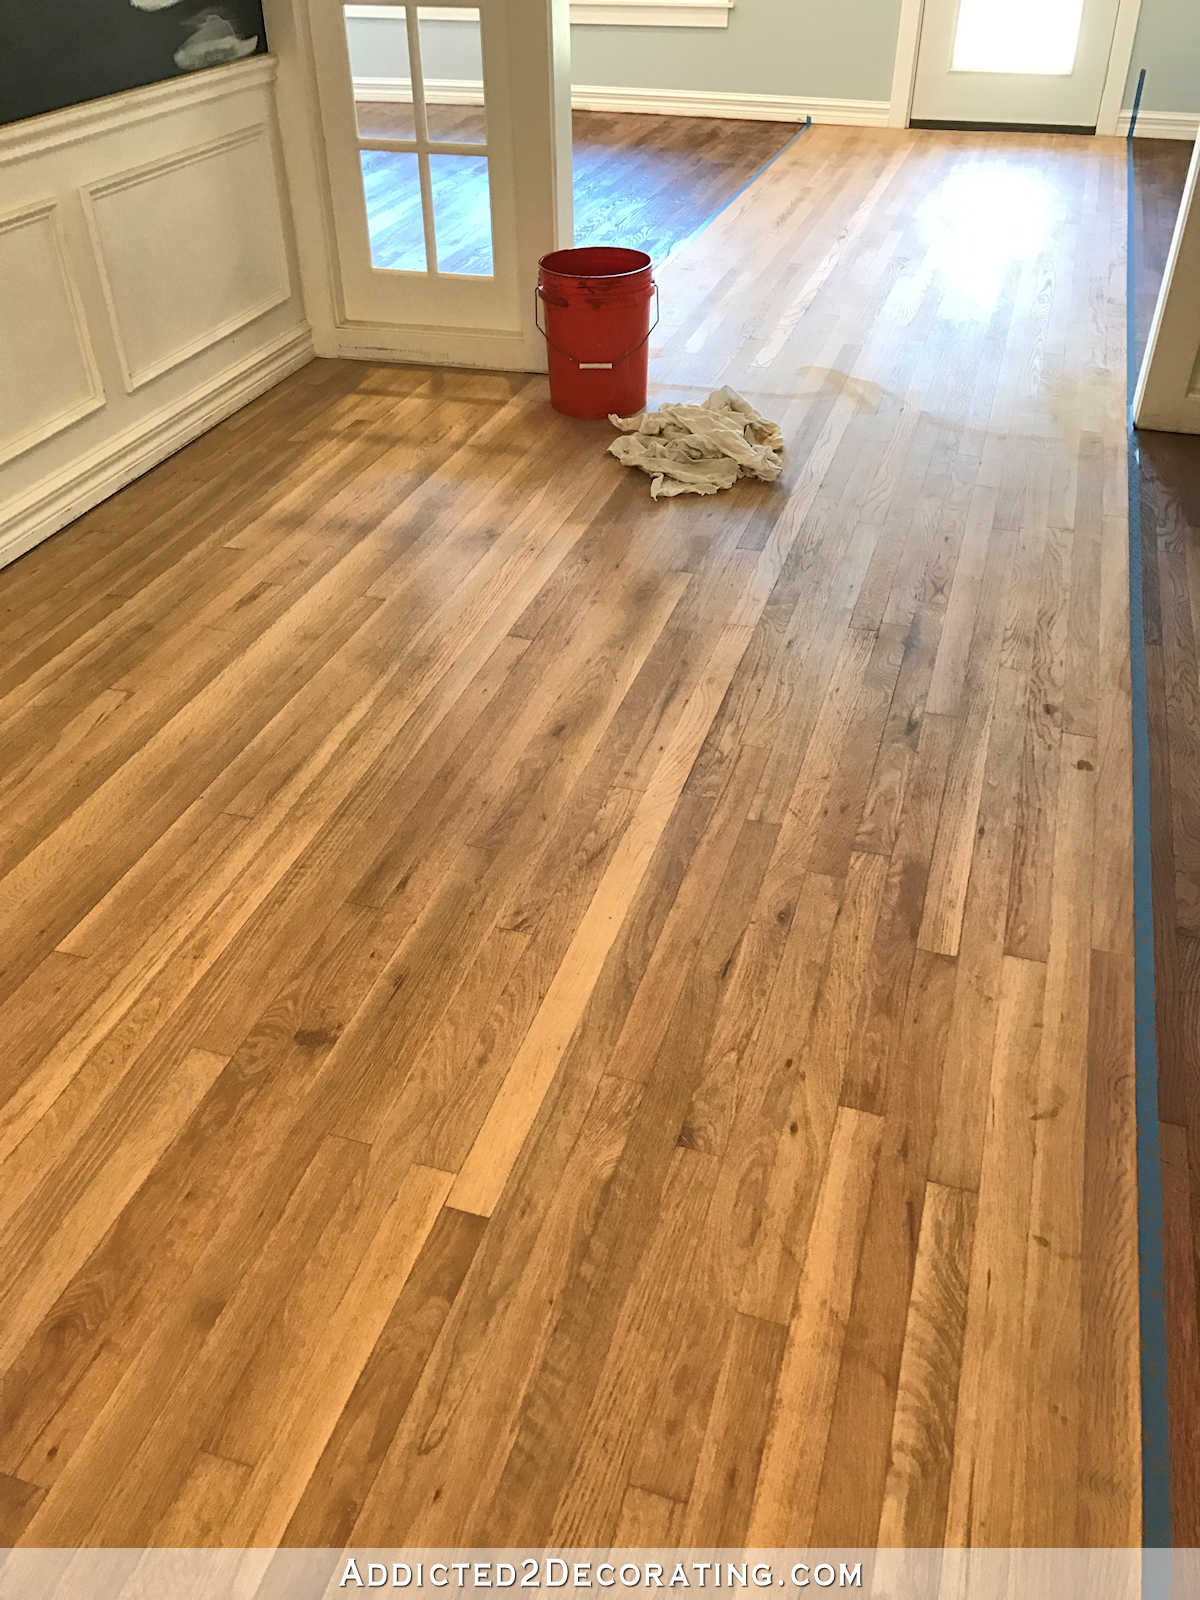 24 Recommended How Long Does It Take to Refinish Hardwood Floors 2023 free download how long does it take to refinish hardwood floors of adventures in staining my red oak hardwood floors products process inside staining red oak hardwood floors 8 entryway and music room wood